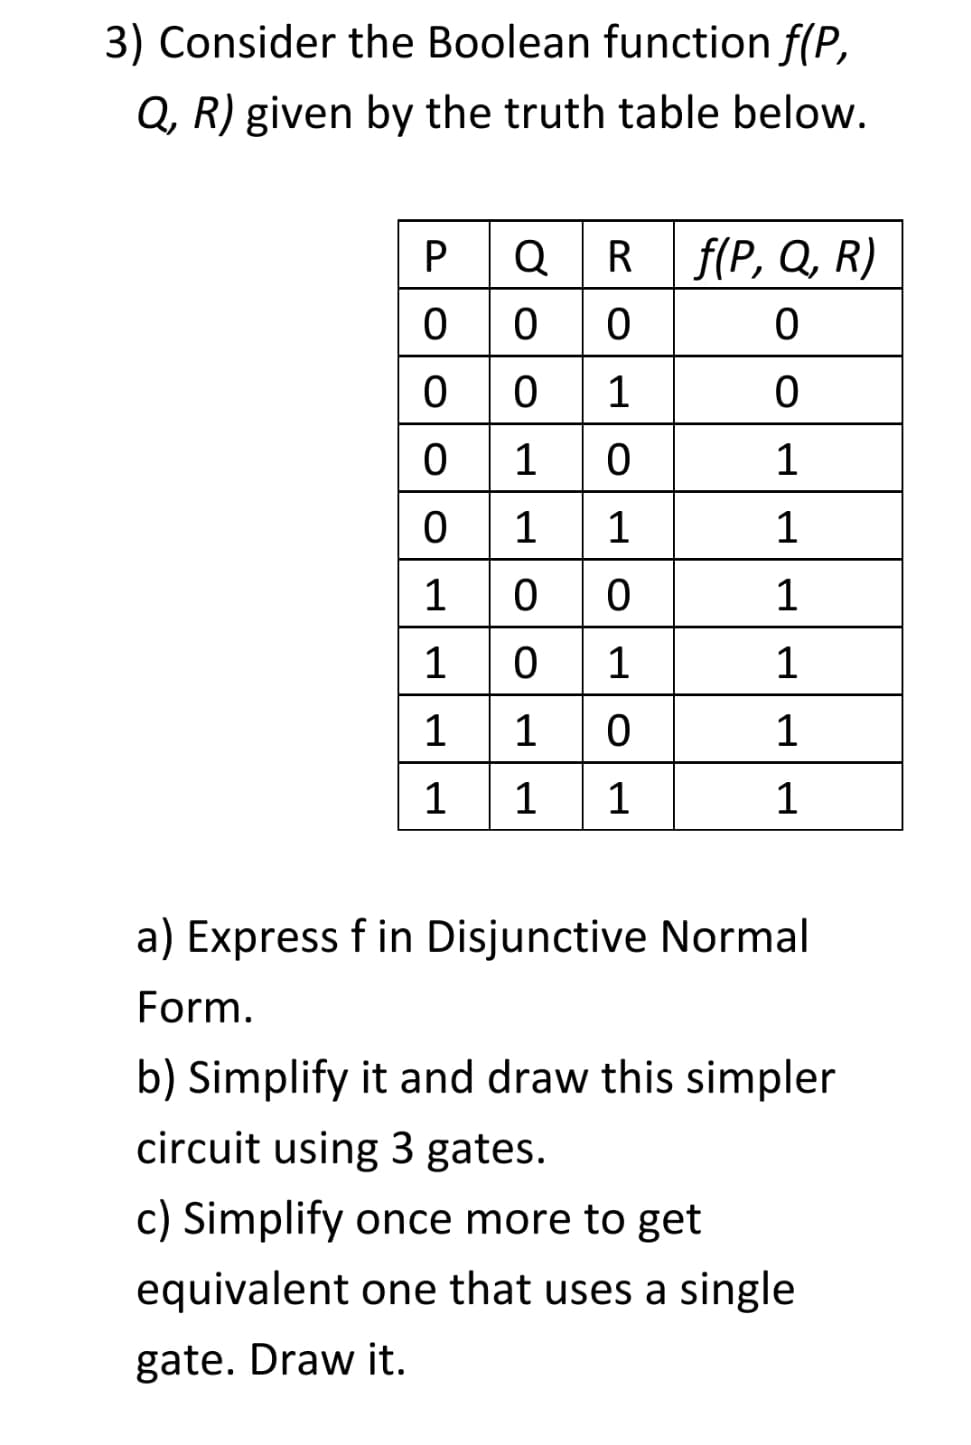 3) Consider the Boolean function f(P,
Q, R) given by the truth table below.
Q R f(P, Q, R)
0 0 0
00 1
0 1 0
0 1 1
1 0
1
1
1
1
1
1
1
1
1
1
1
a) Express f in Disjunctive Normal
Form.
b) Simplify it and draw this simpler
circuit using 3 gates.
c) Simplify once more to get
equivalent one that uses a single
gate. Draw it.
